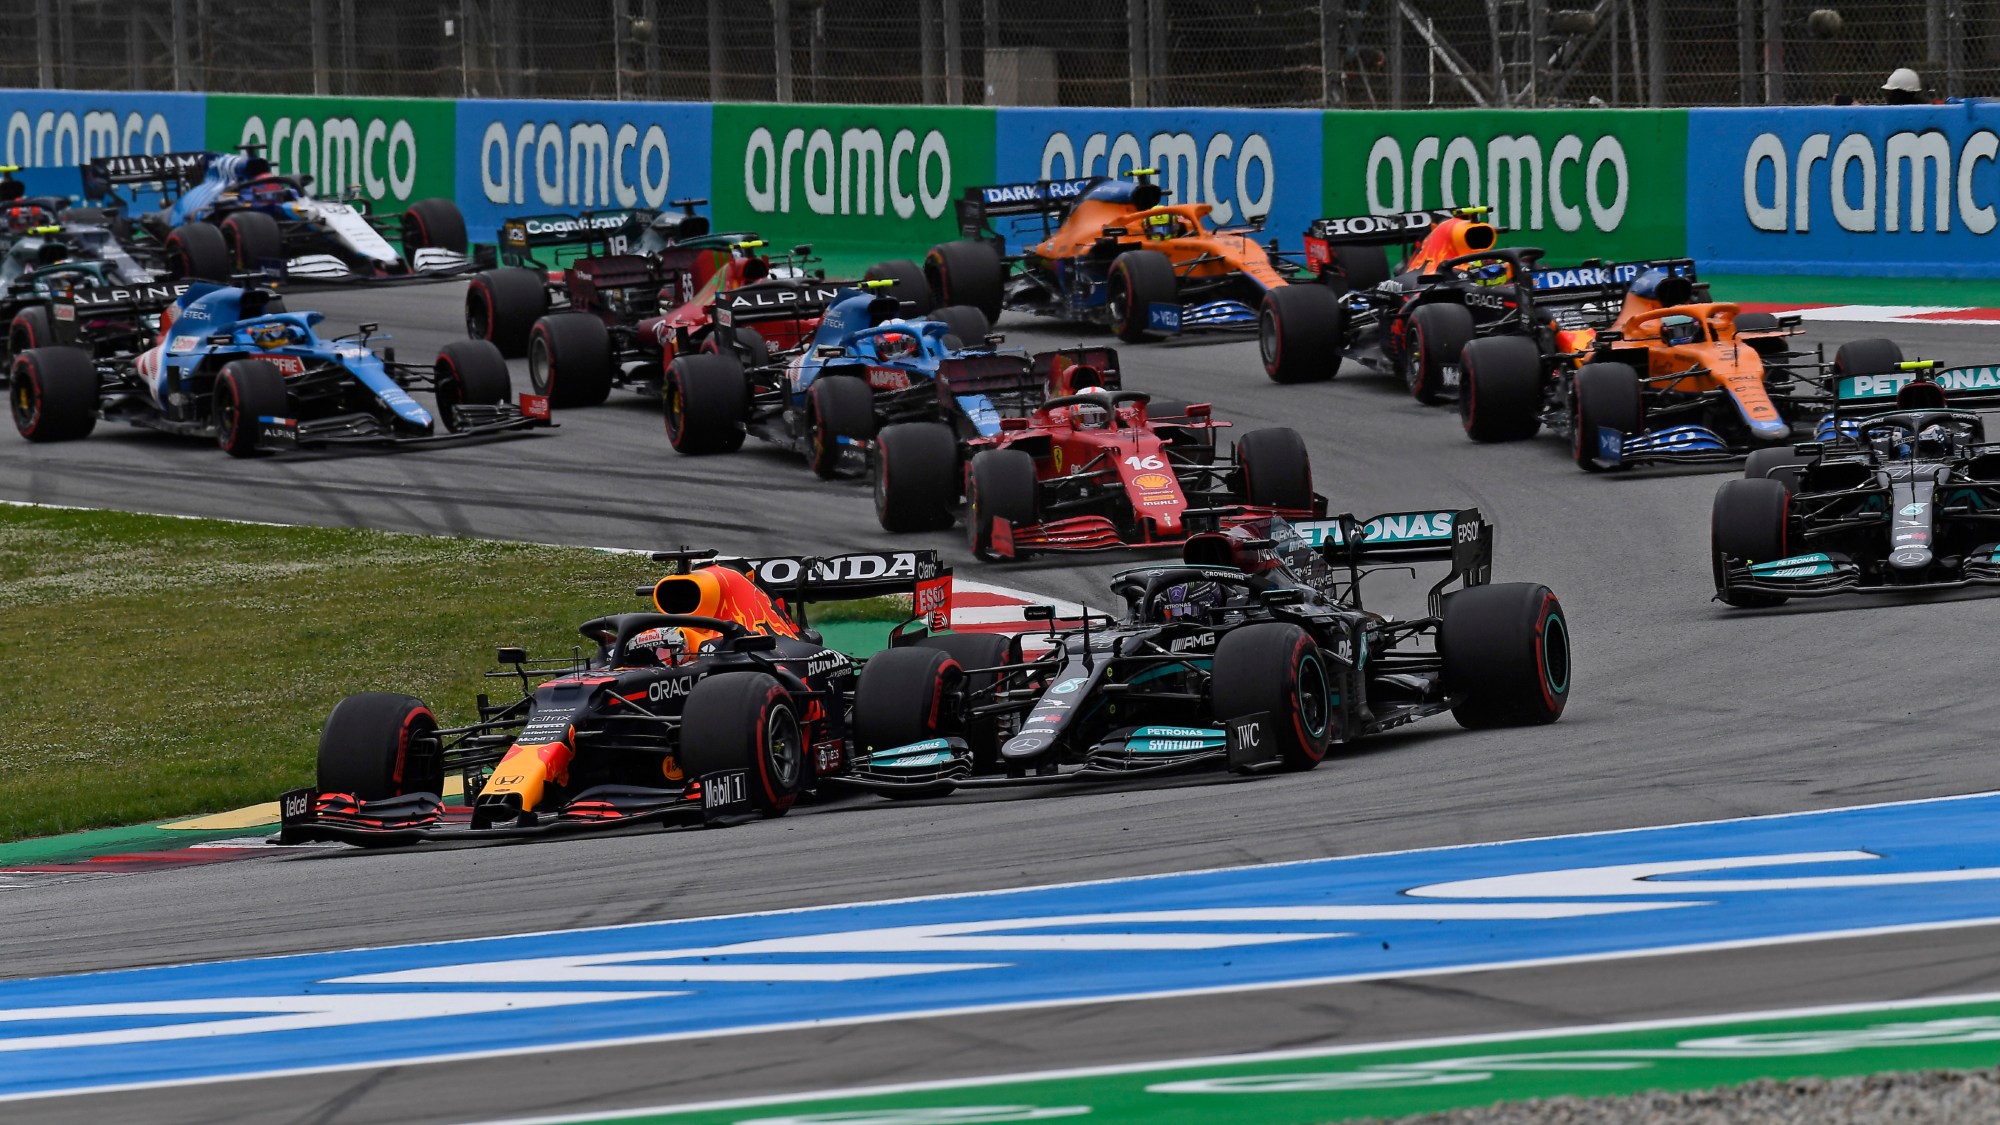 F1 announces a brand new award for most overtakes in a season